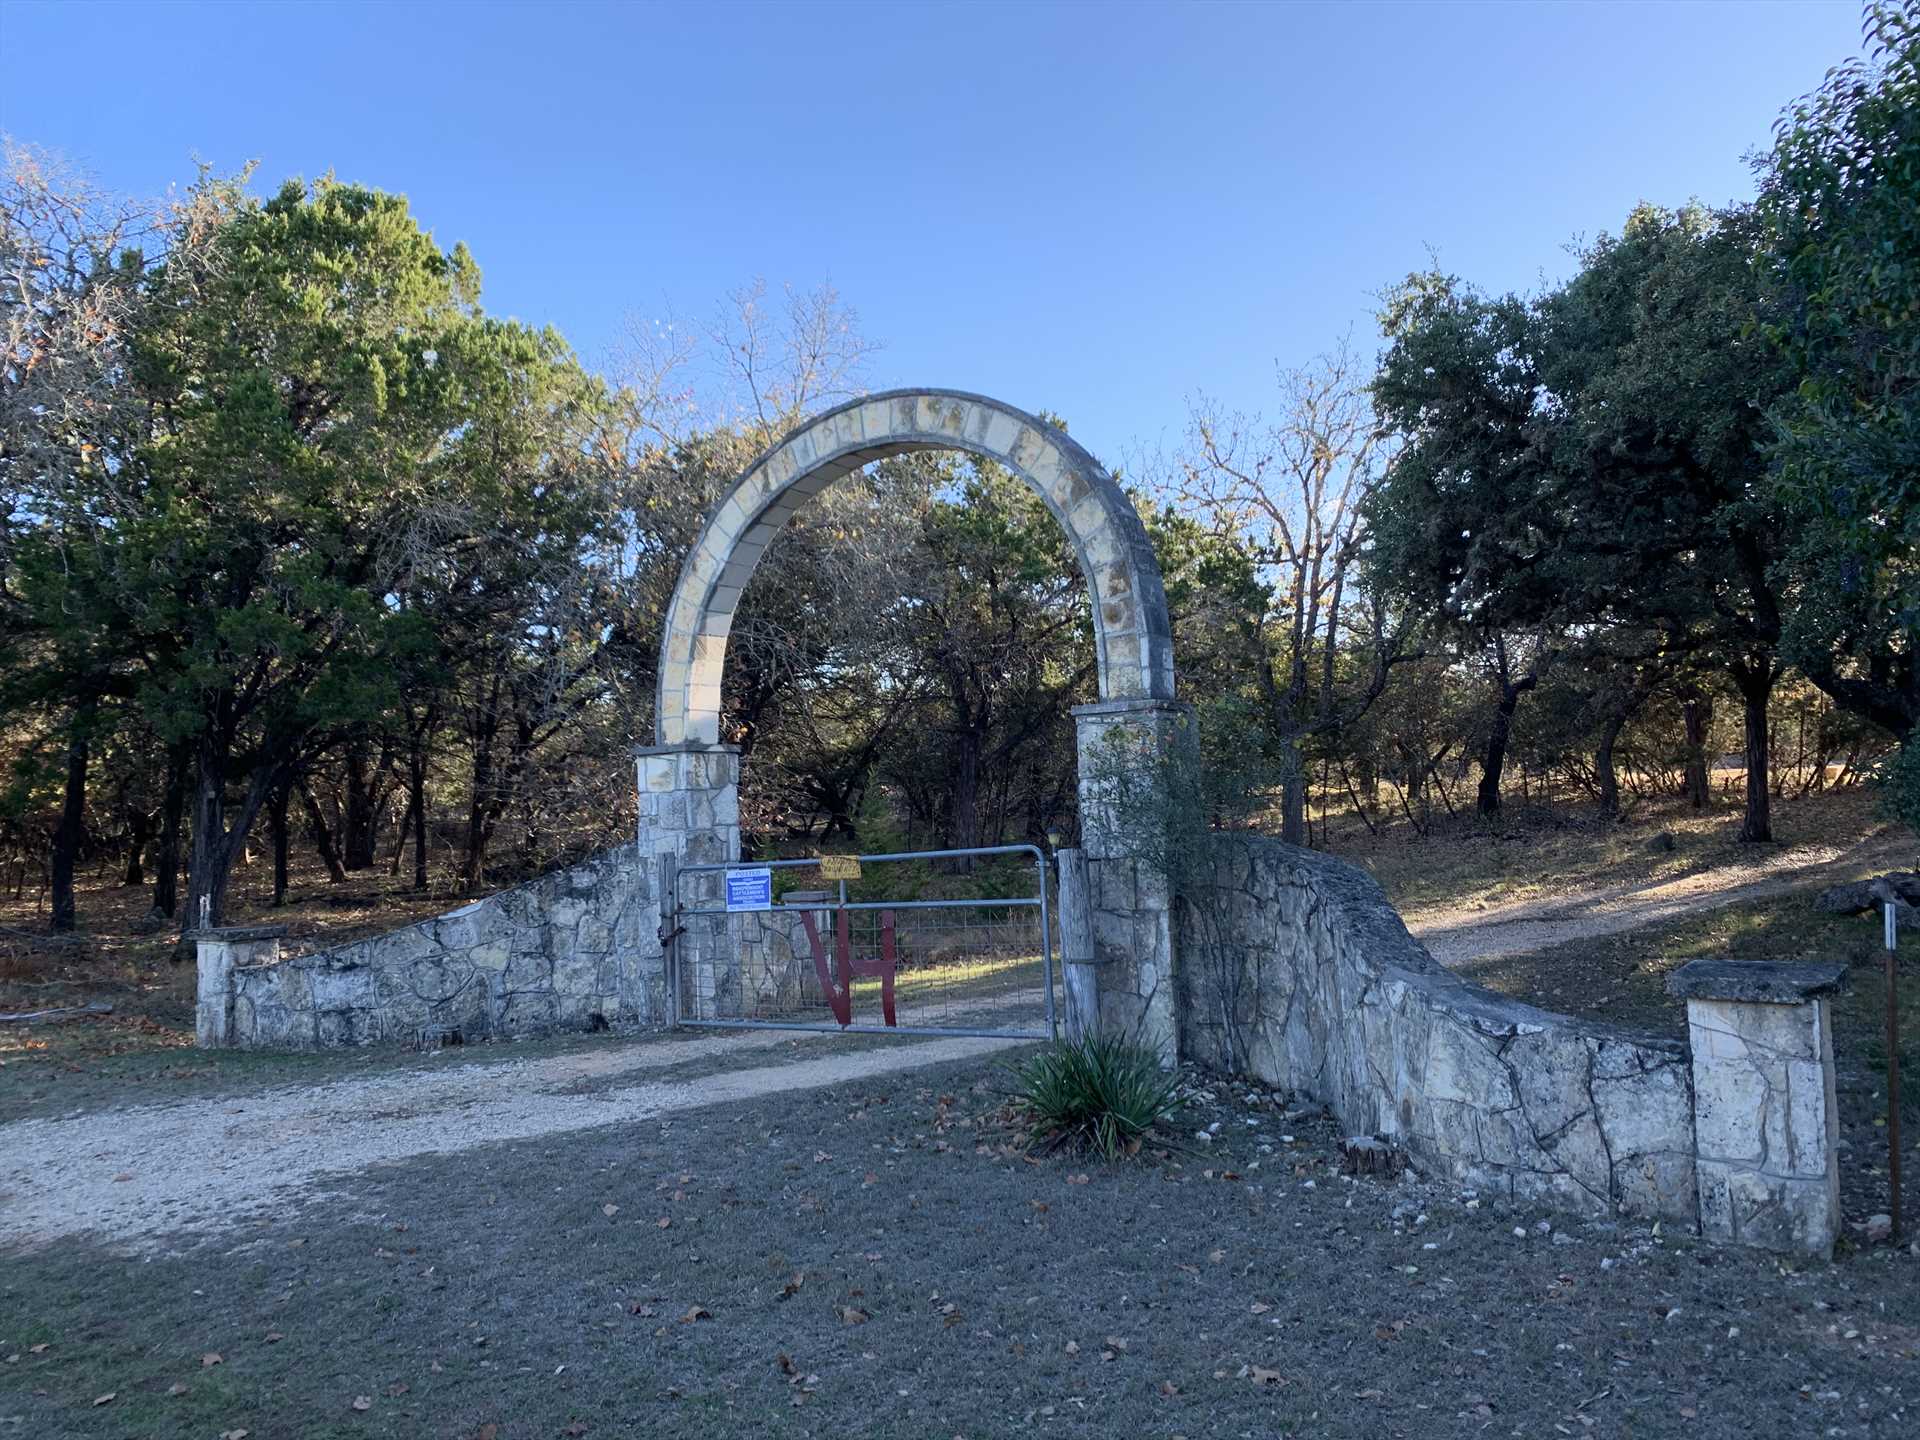                                                 The moment you see the distinctive stone gate at the River Home's entrance, you'll know you're in for something special!